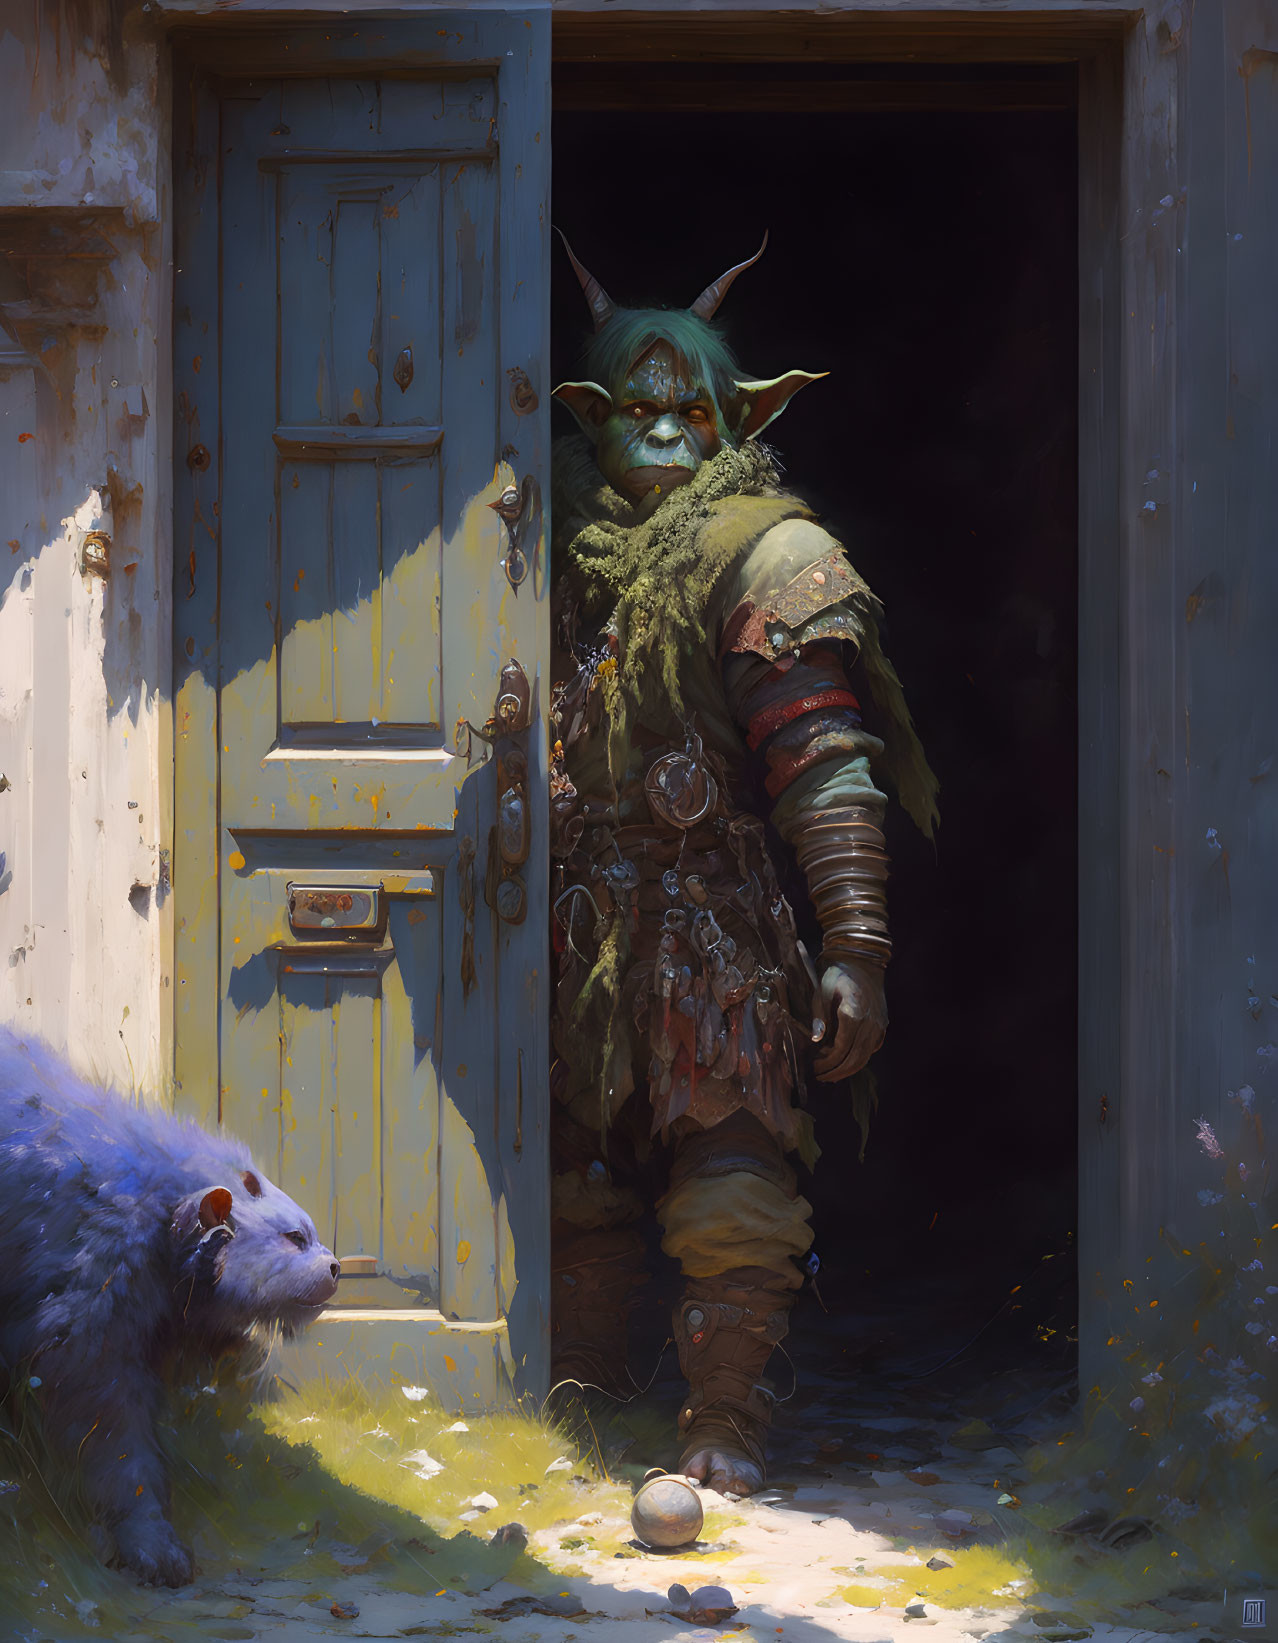 Orcs suddenly knocked on the door in silence